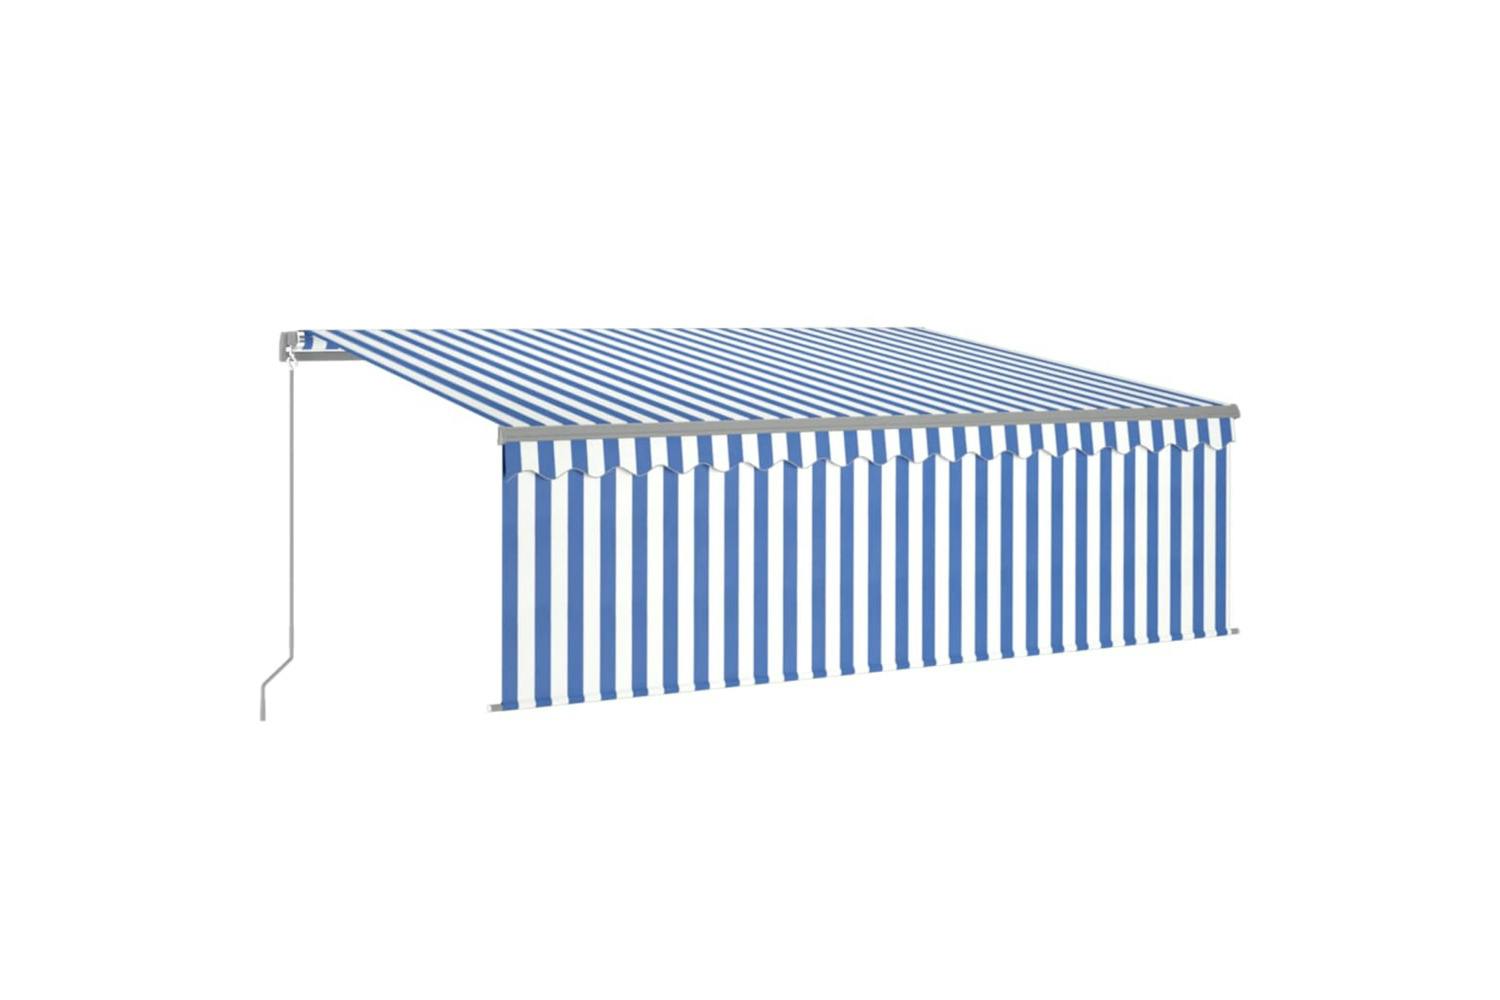 Vidaxl 3069421 Manual Retractable Awning With Blind&led 4x3m Blue&white